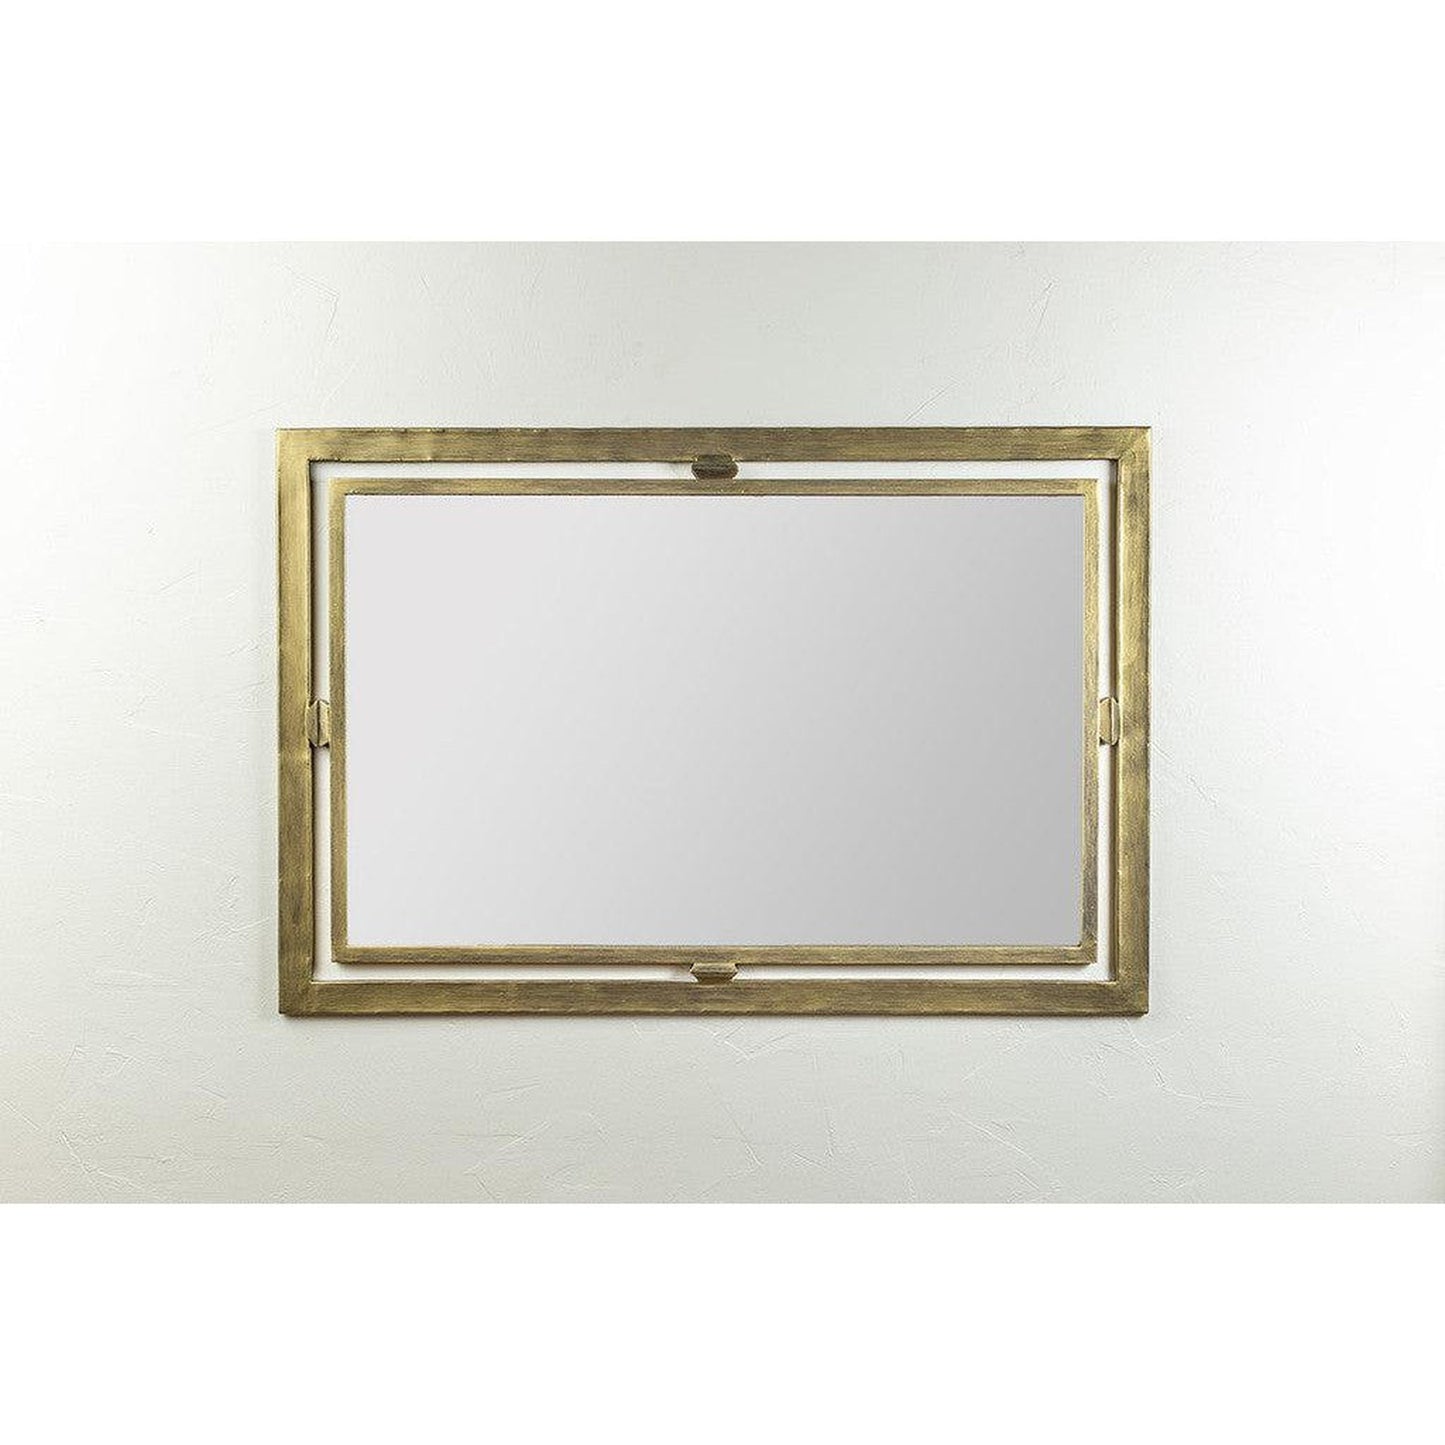 Stone County Ironworks Forest Hill 27" x 40" Large Burnished Gold Iron Wall Mirror With Copper Iron Accent